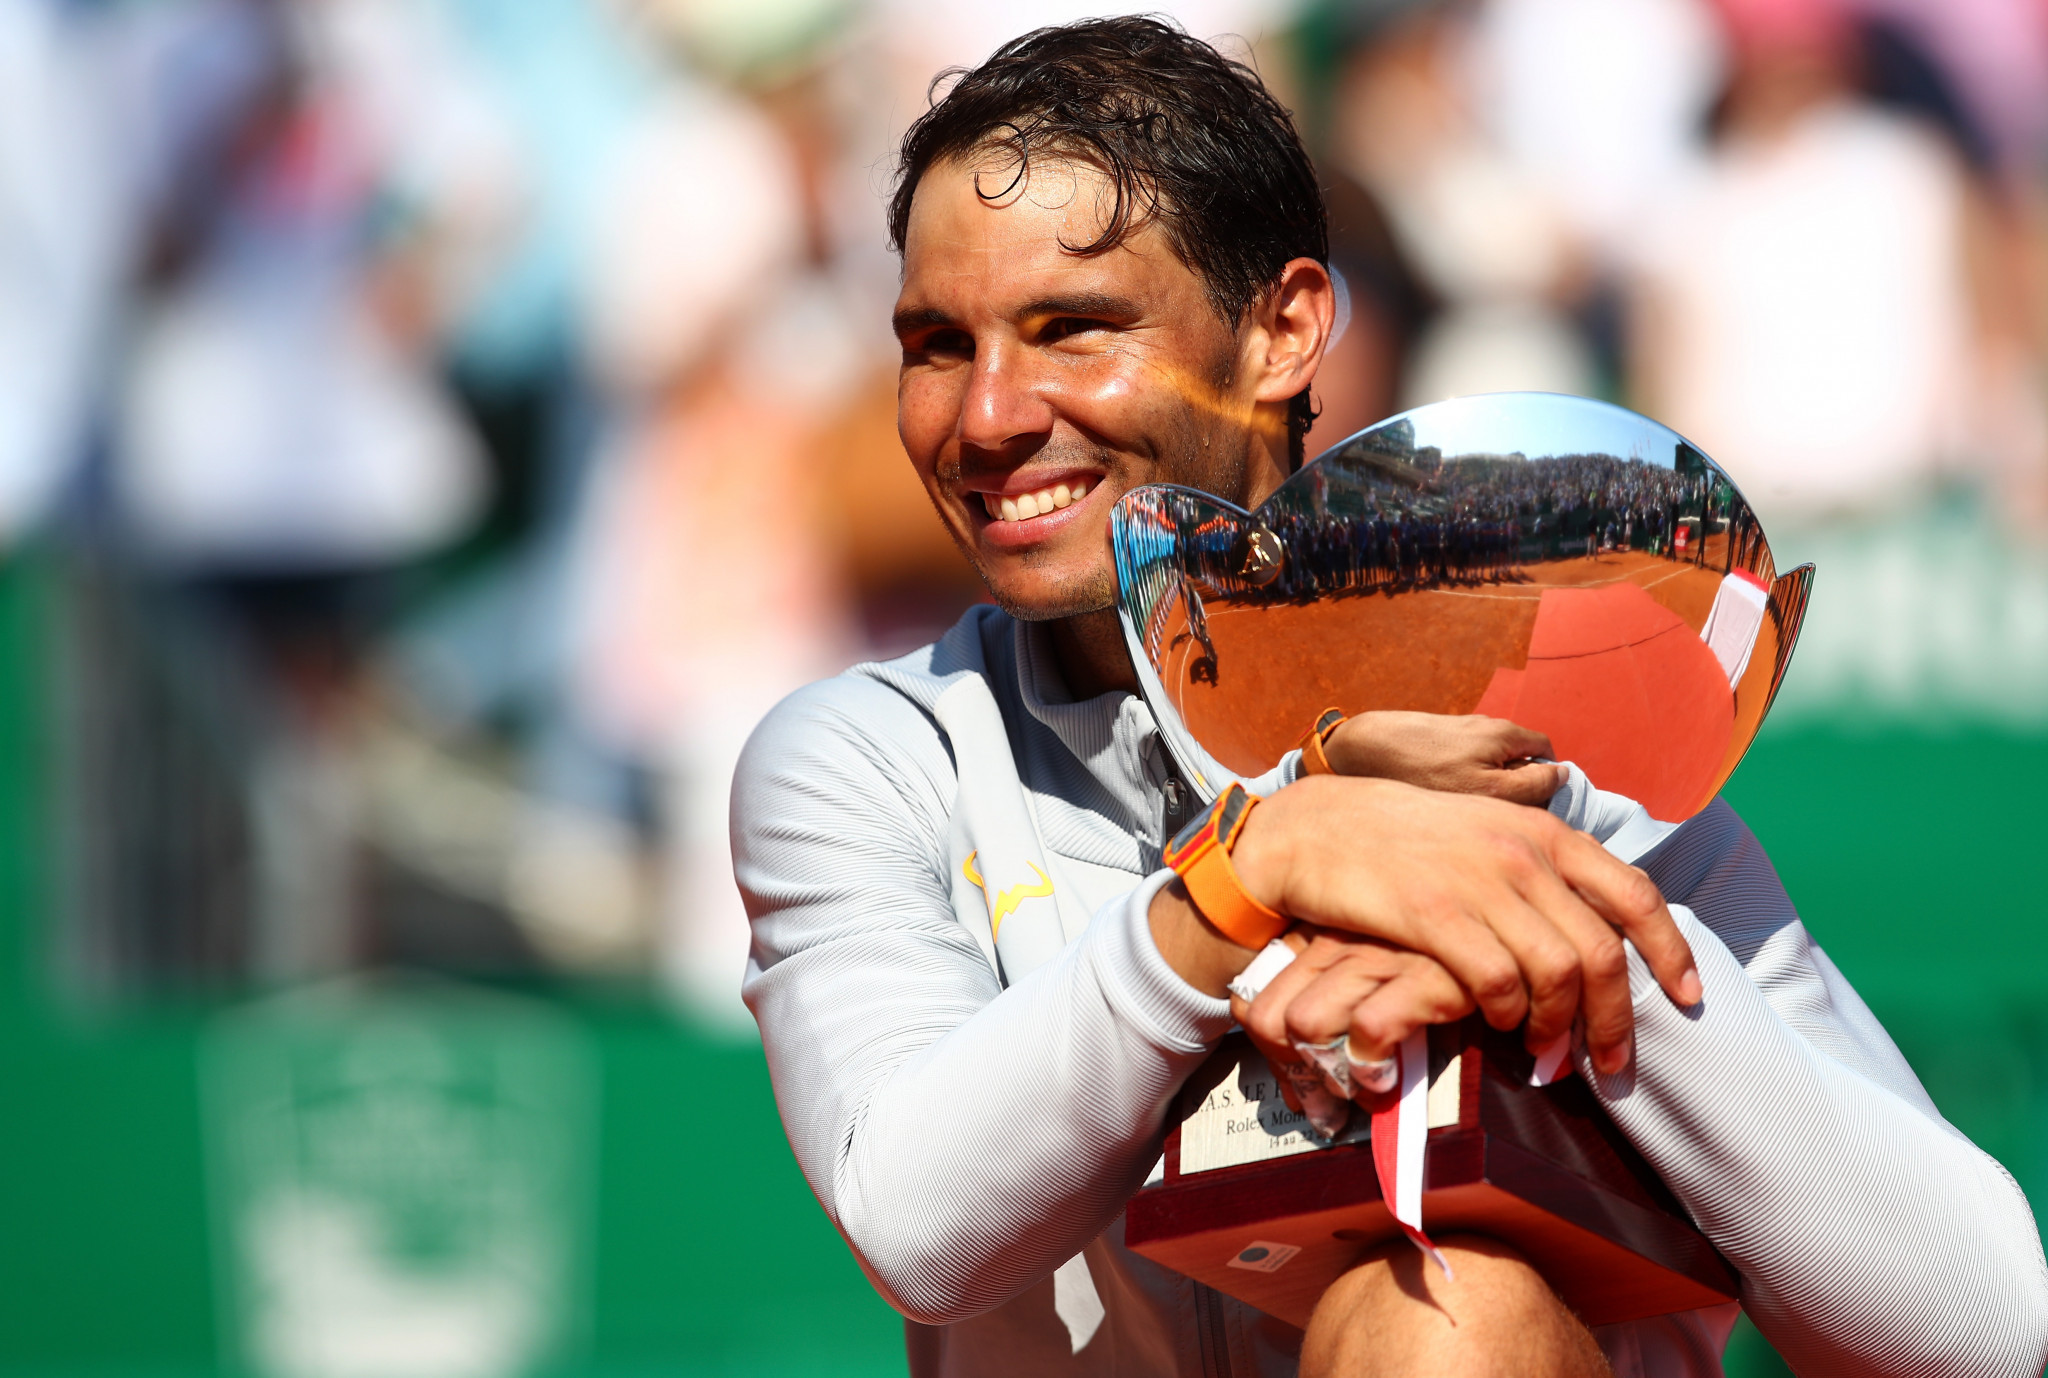  Nadal remains world number one after beating Nishikori in Monte Carlo Masters final